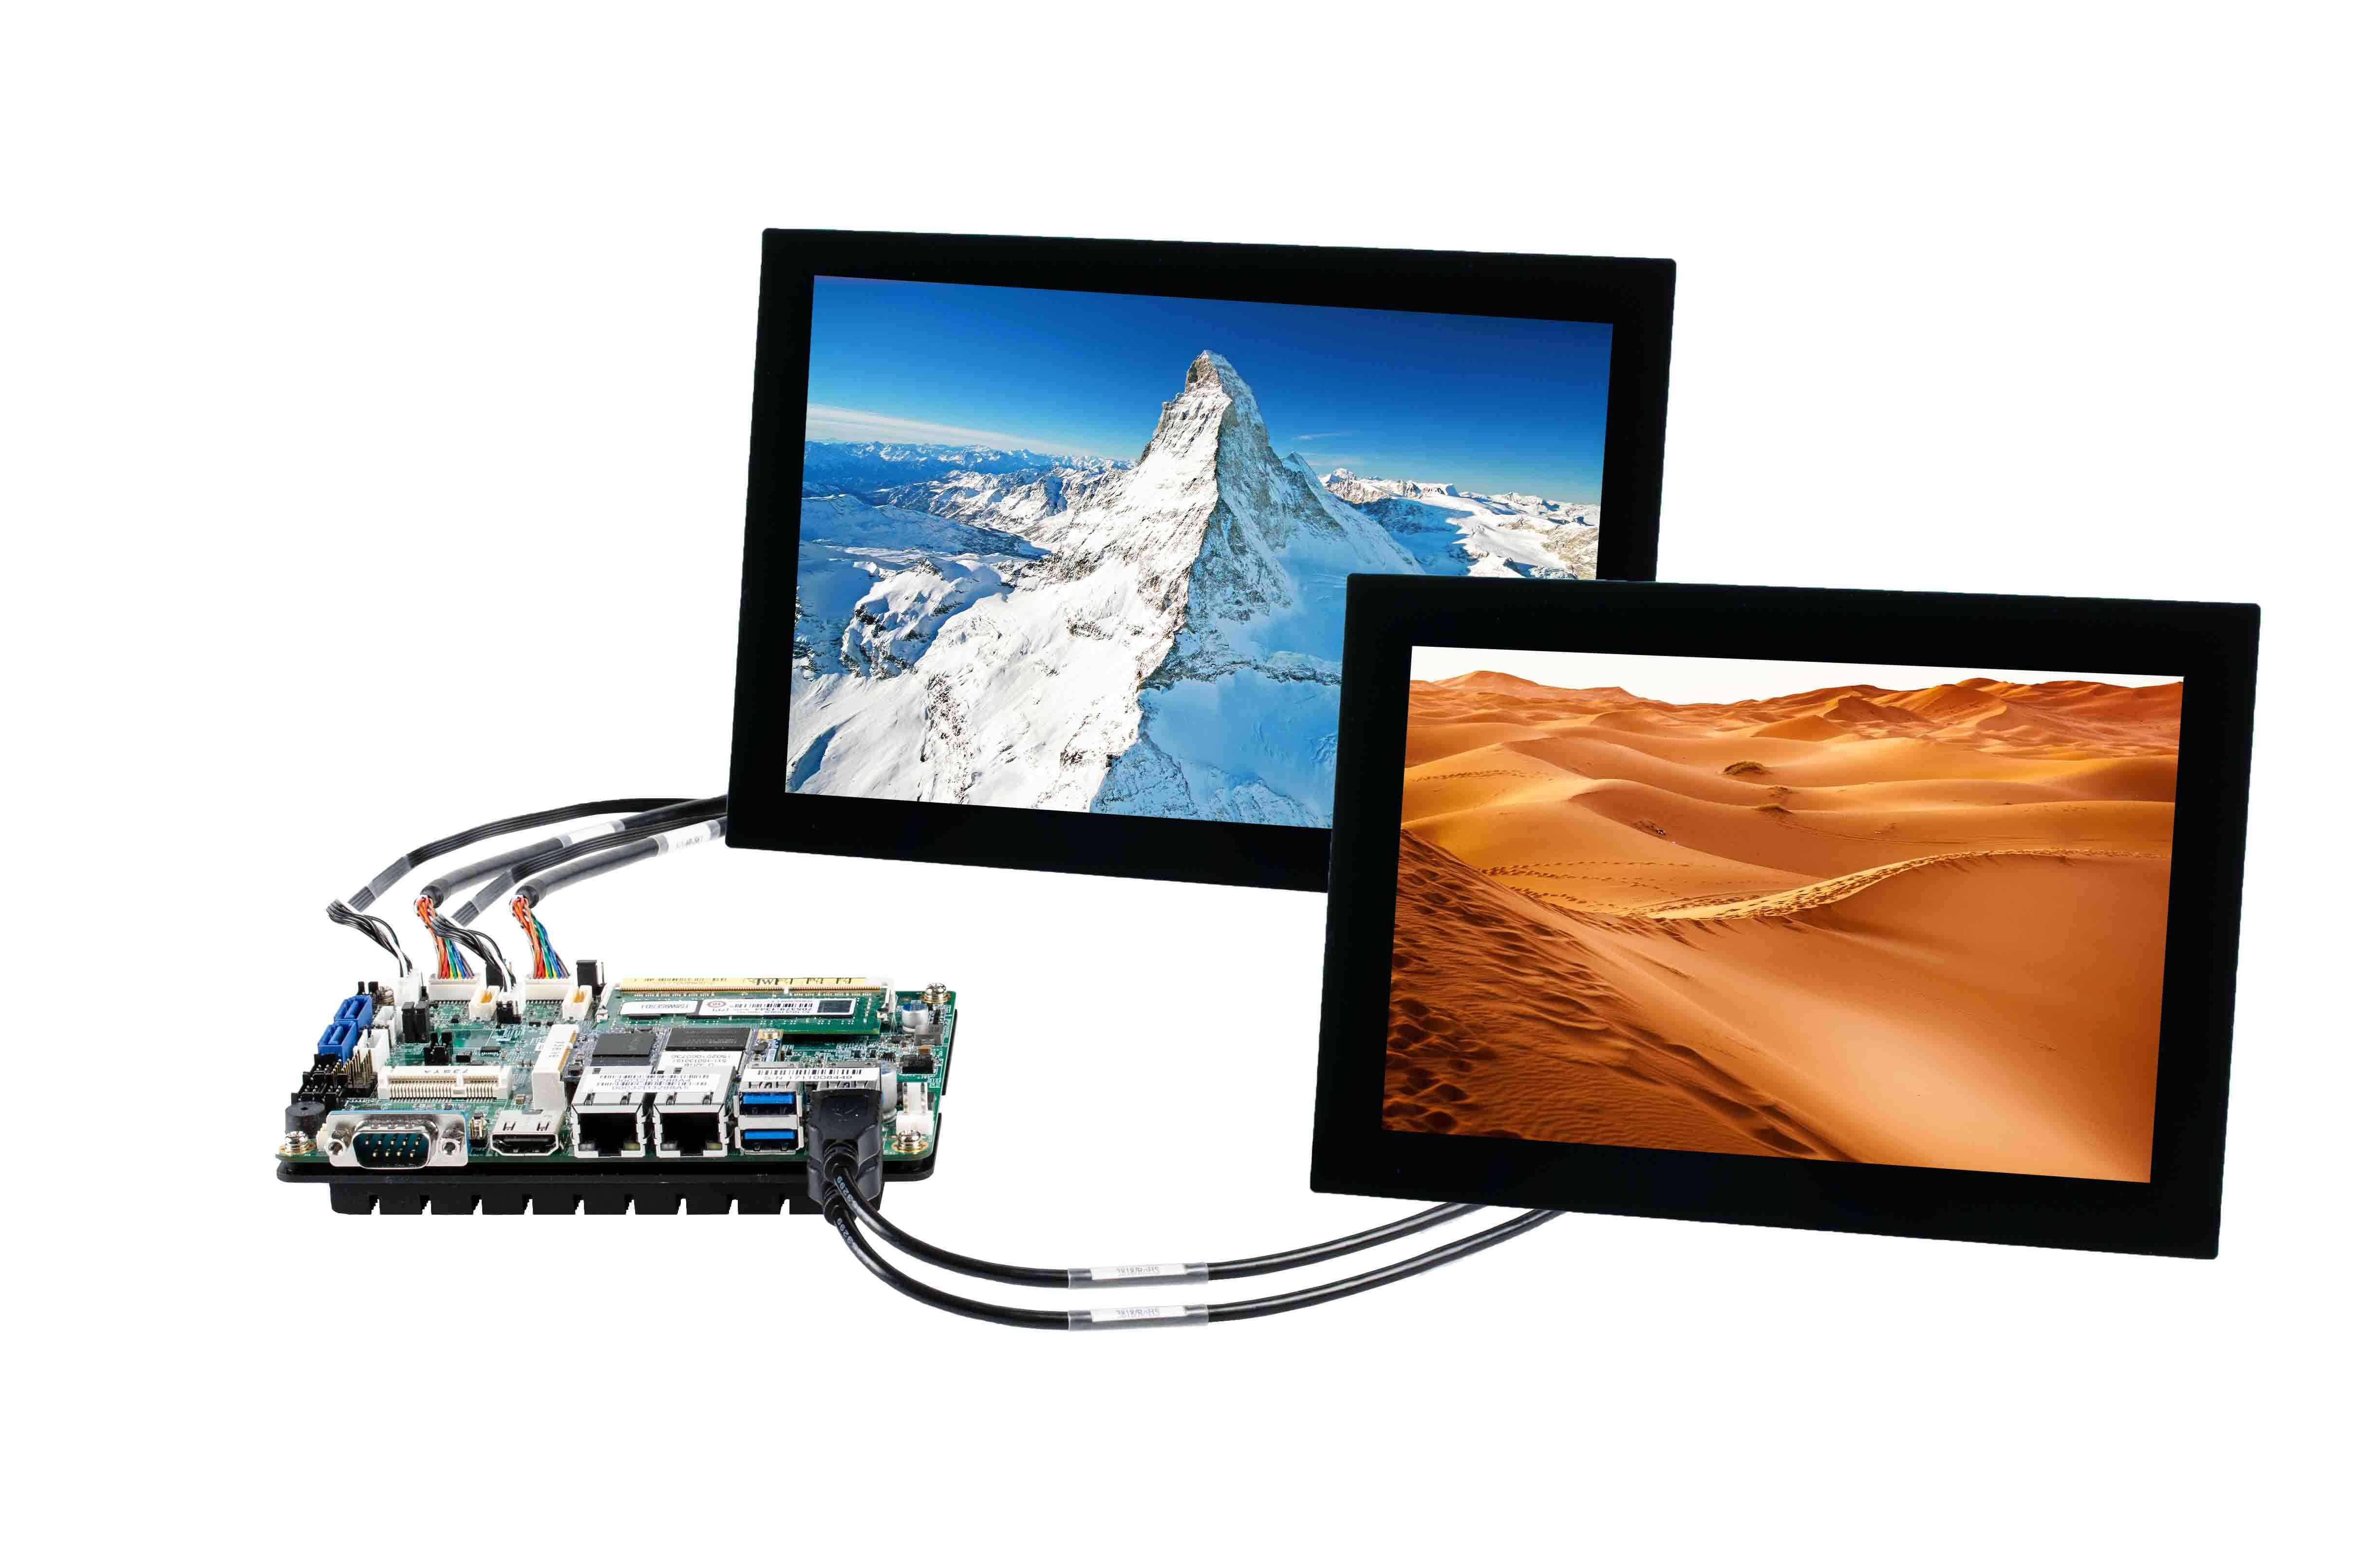 IB818 kit solution with SBC, displays, cables and further accessories